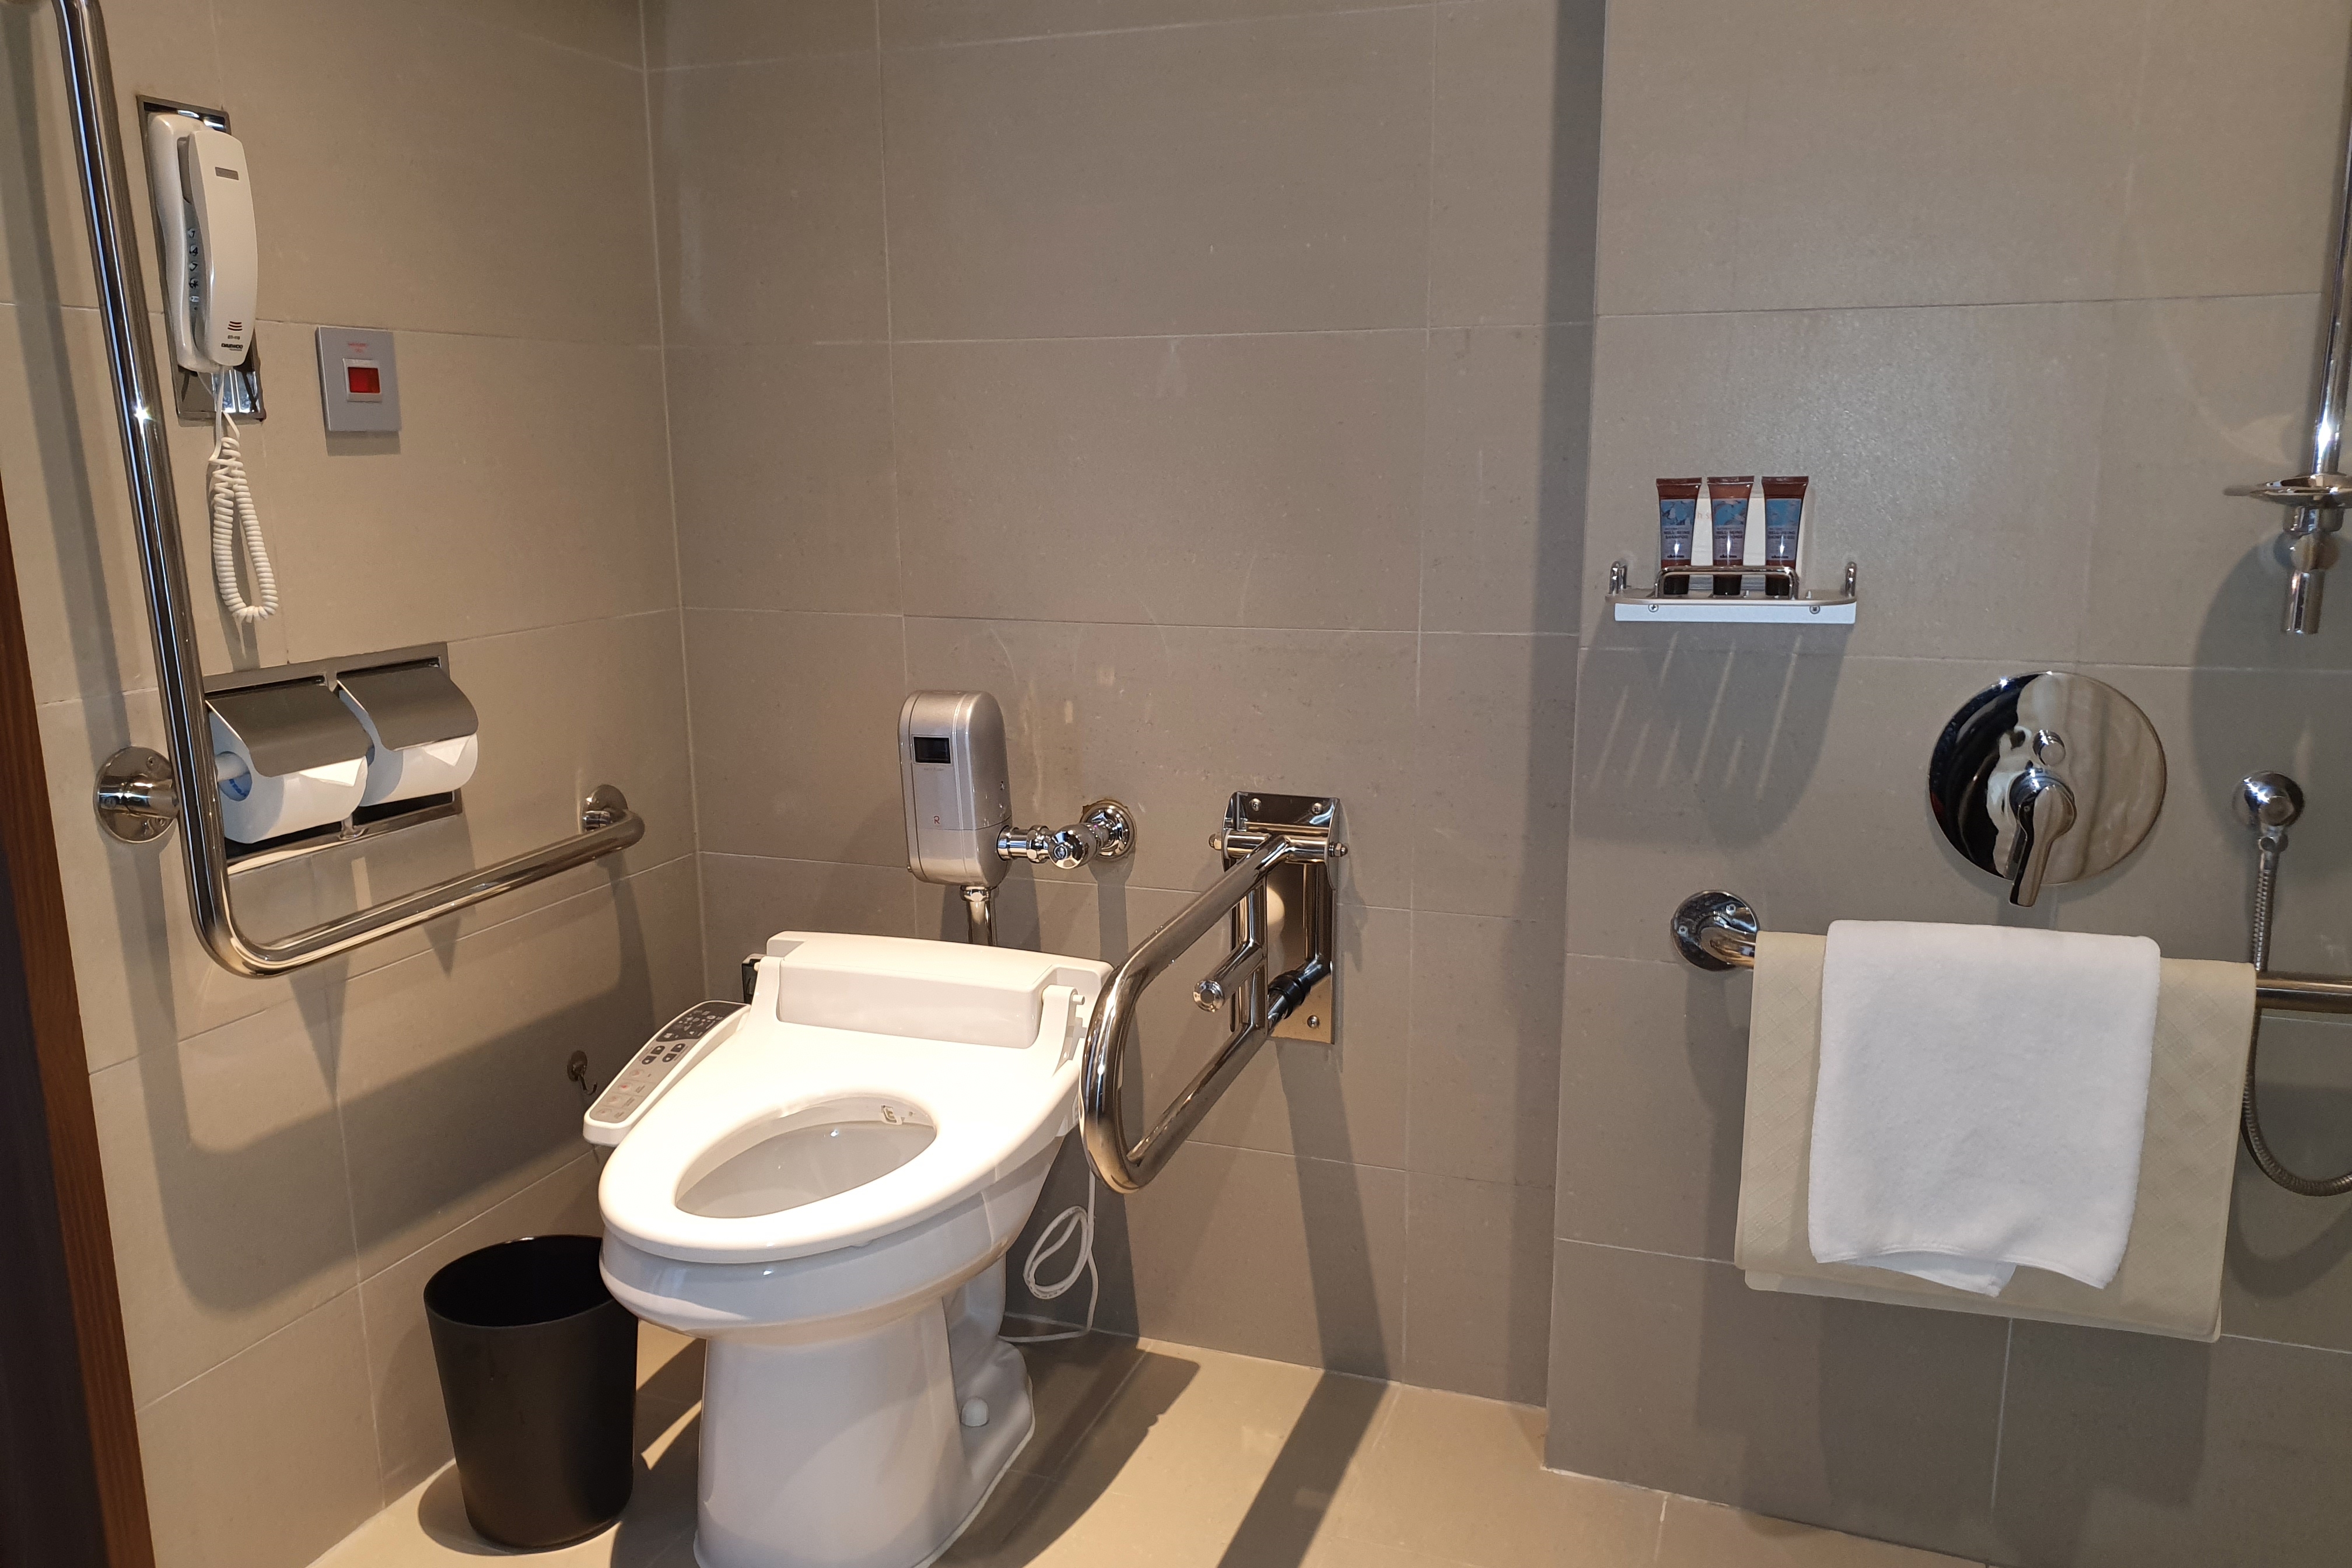 Roll-in shower in the guest room0 : A toilet equipped with grab bars